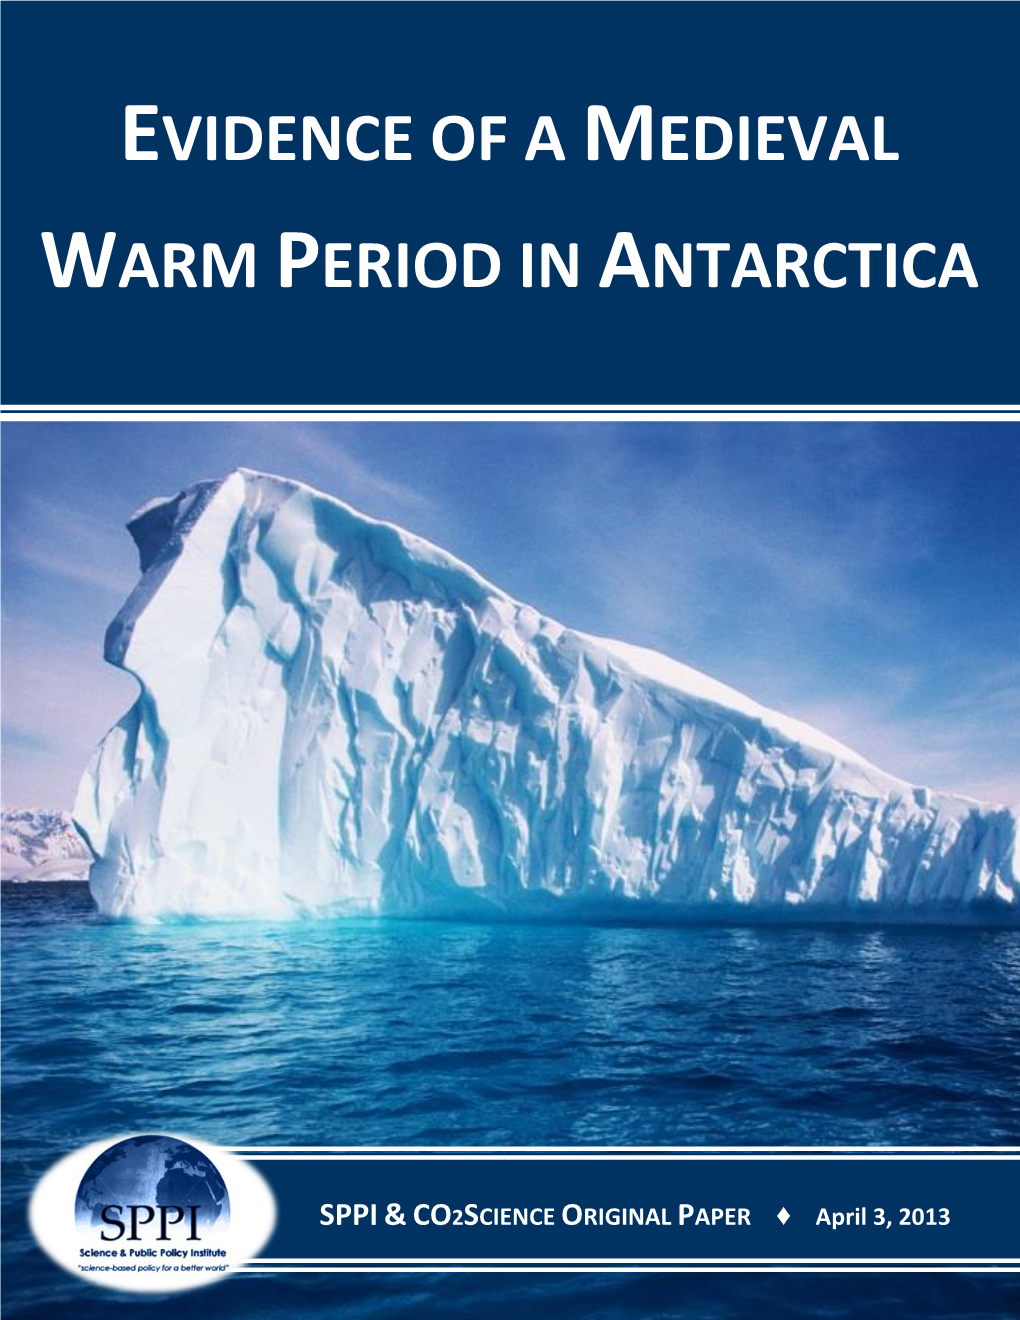 Evidence of a Medieval Warm Period in Antarctica